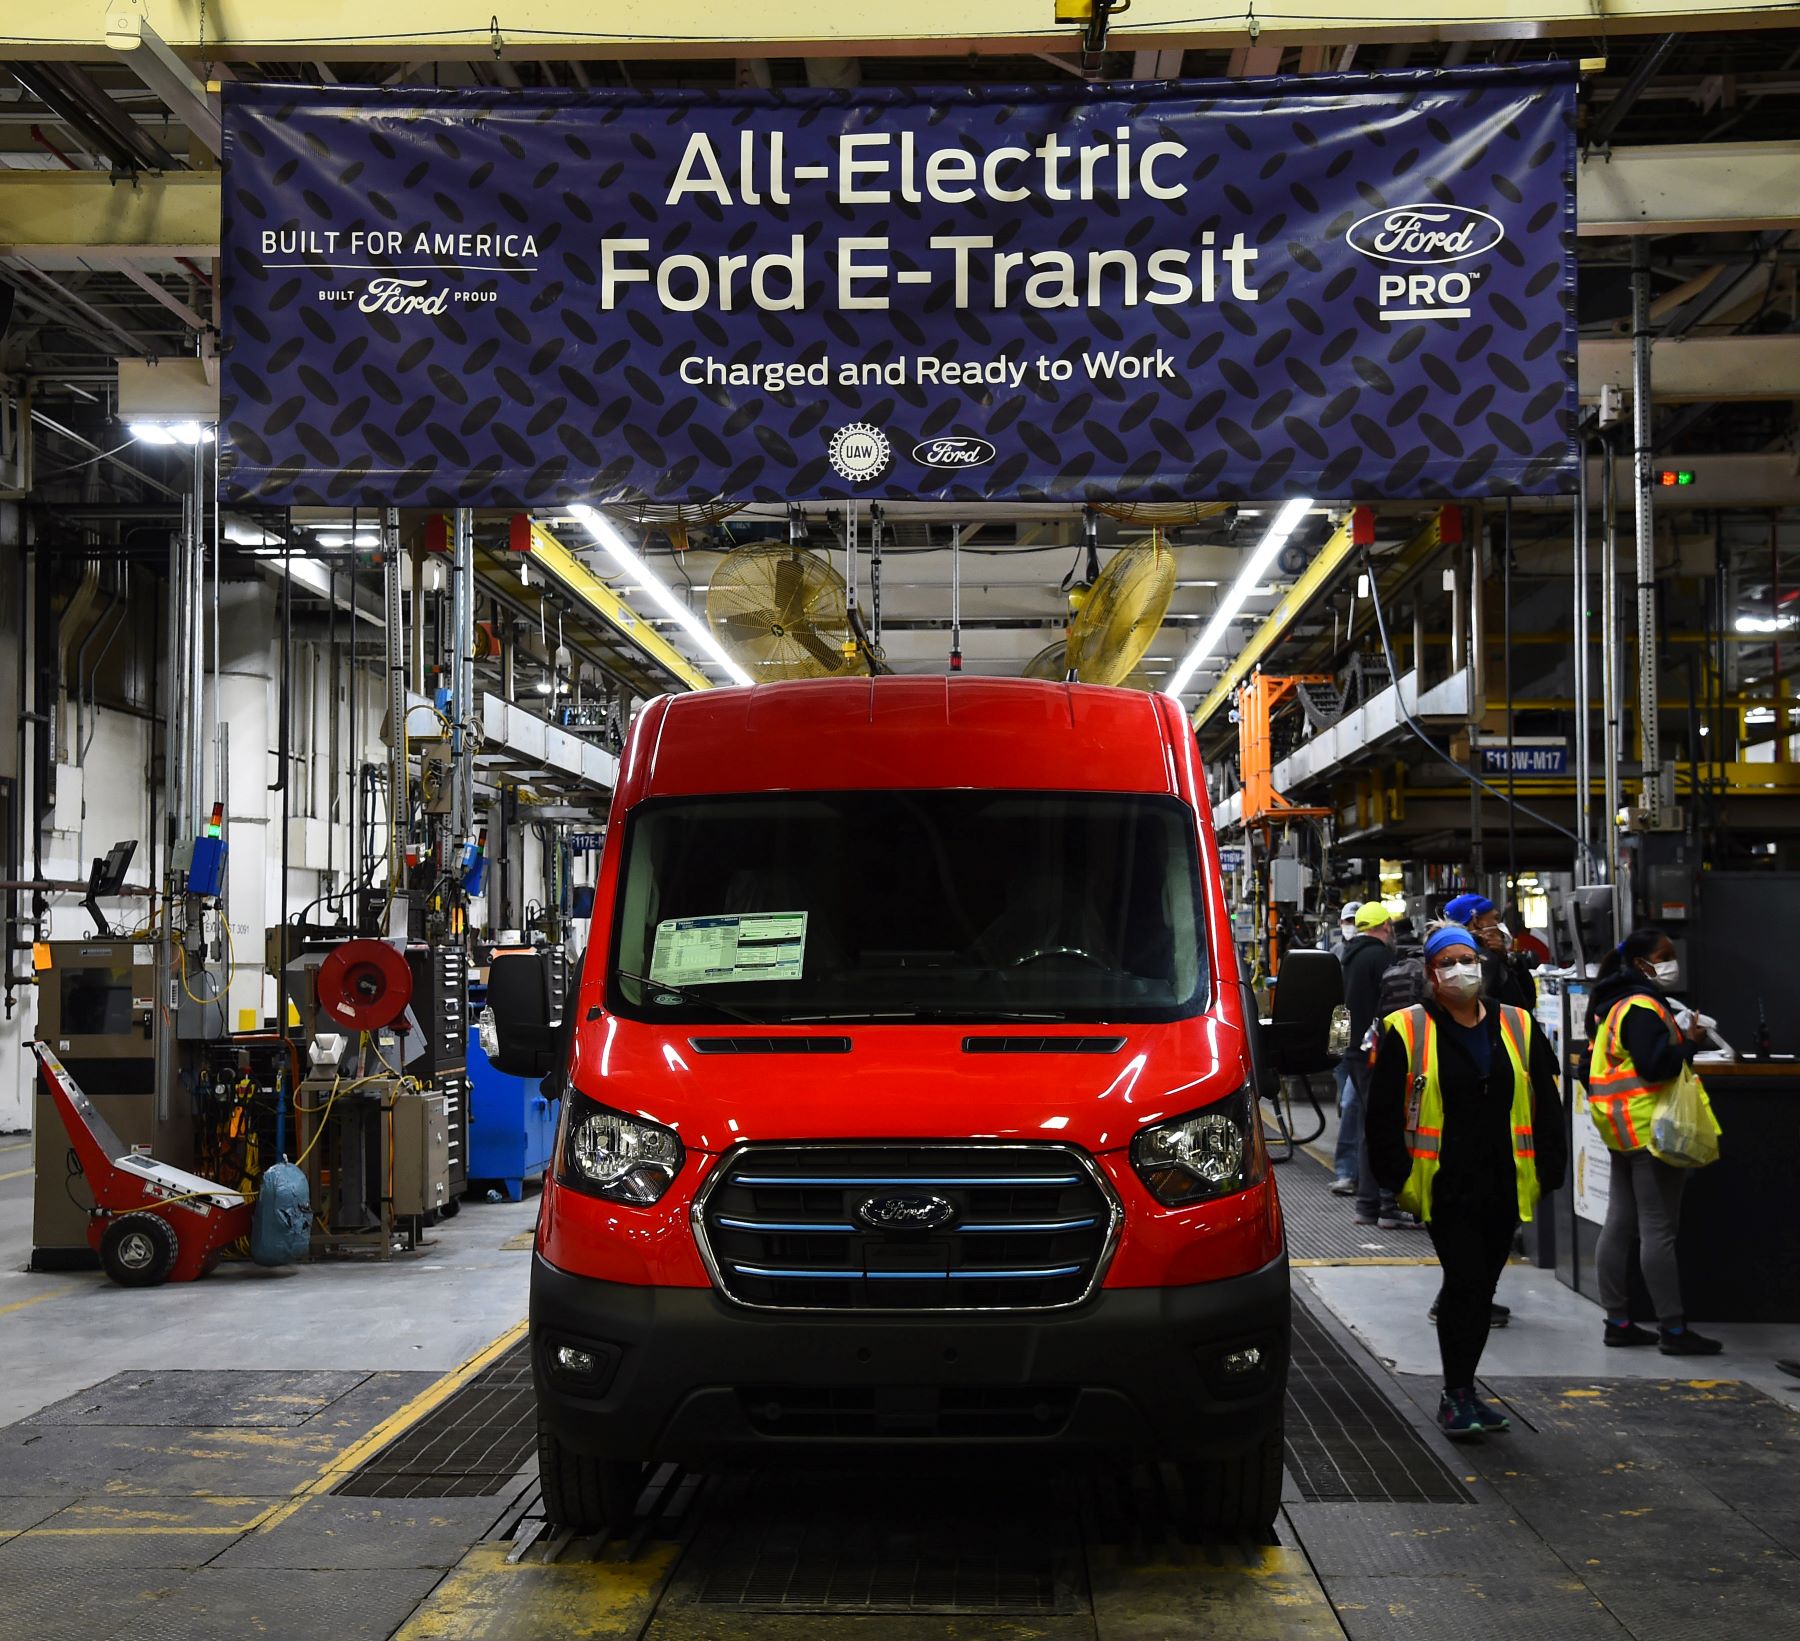 A red 2022 Ford E-Transit all-electric (EV) cargo passenger van on the production/assembly line